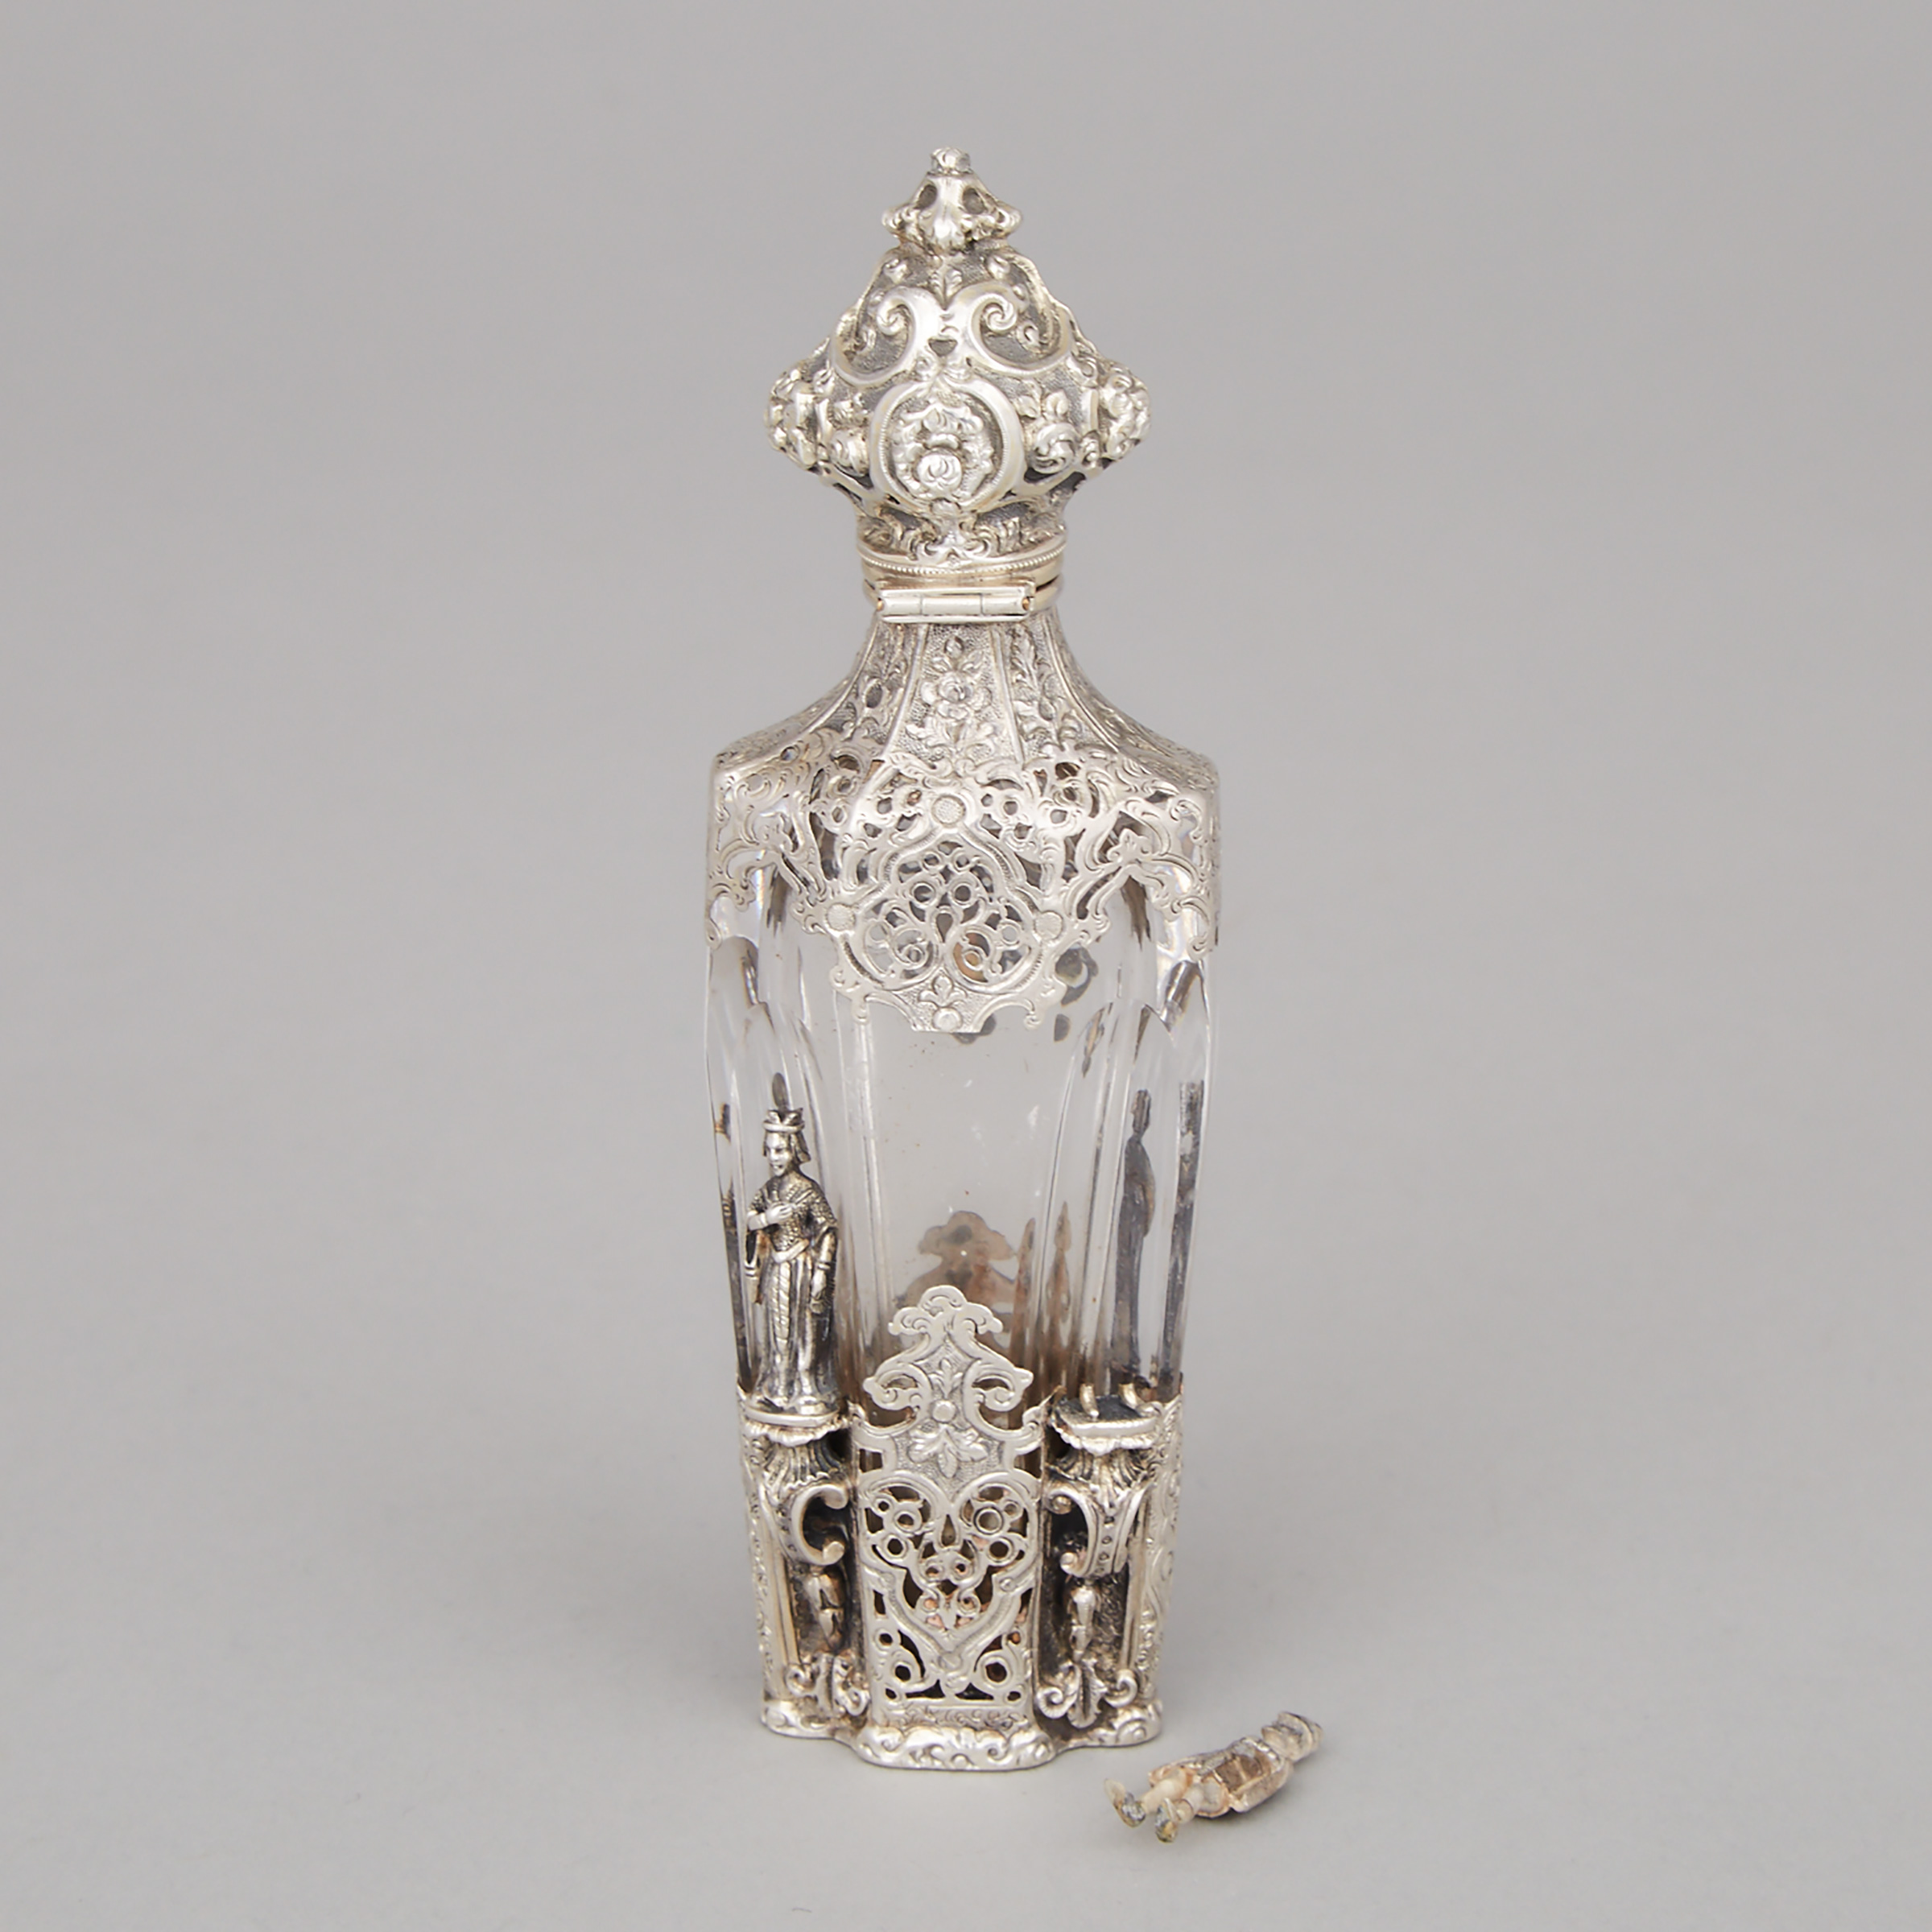 French Silver Mounted Cut Glass Scent Bottle, 19th century